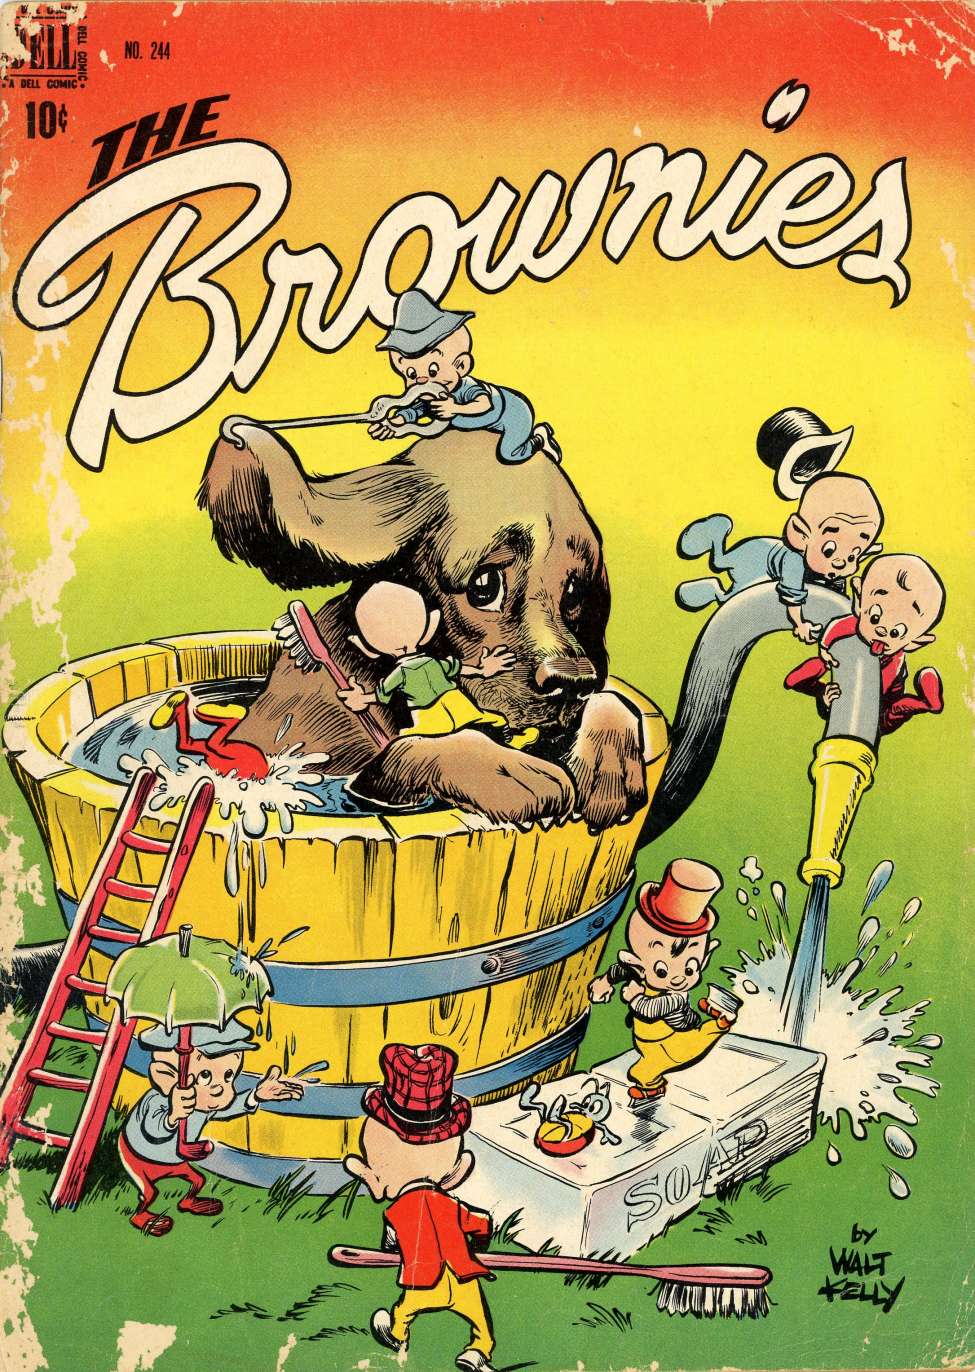 Comic Book Cover For 0244 - The Brownies